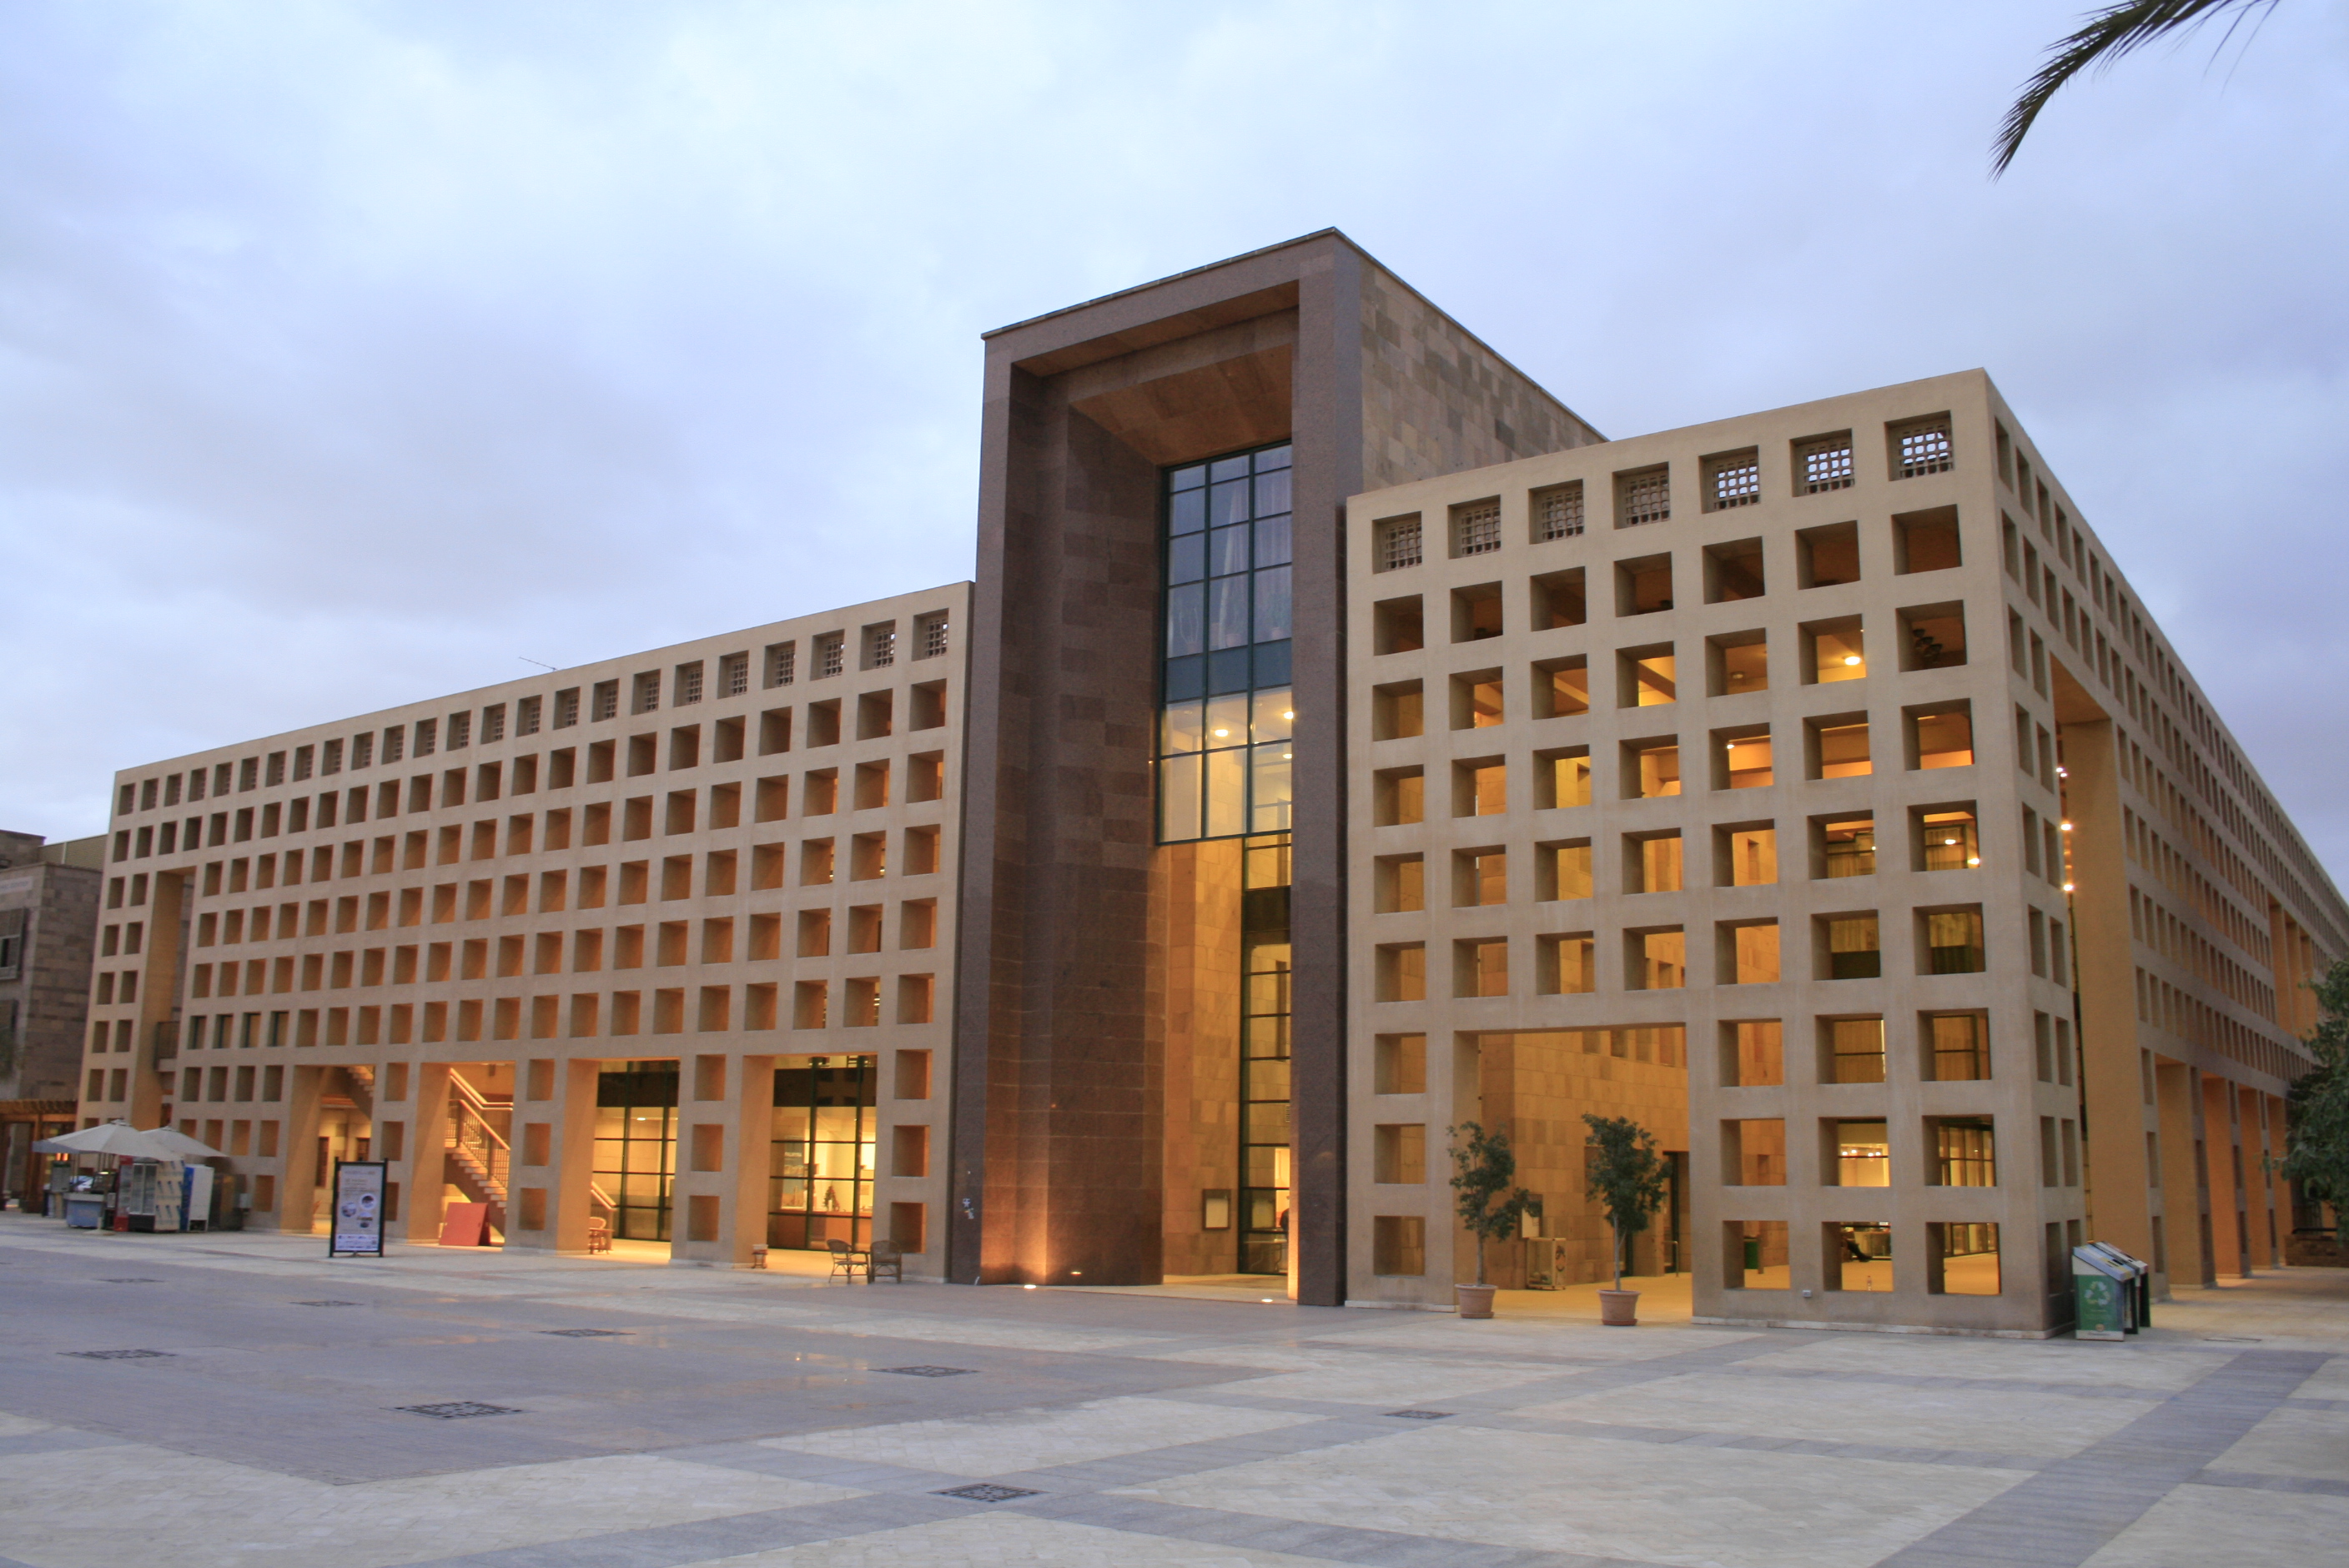 auc main library building